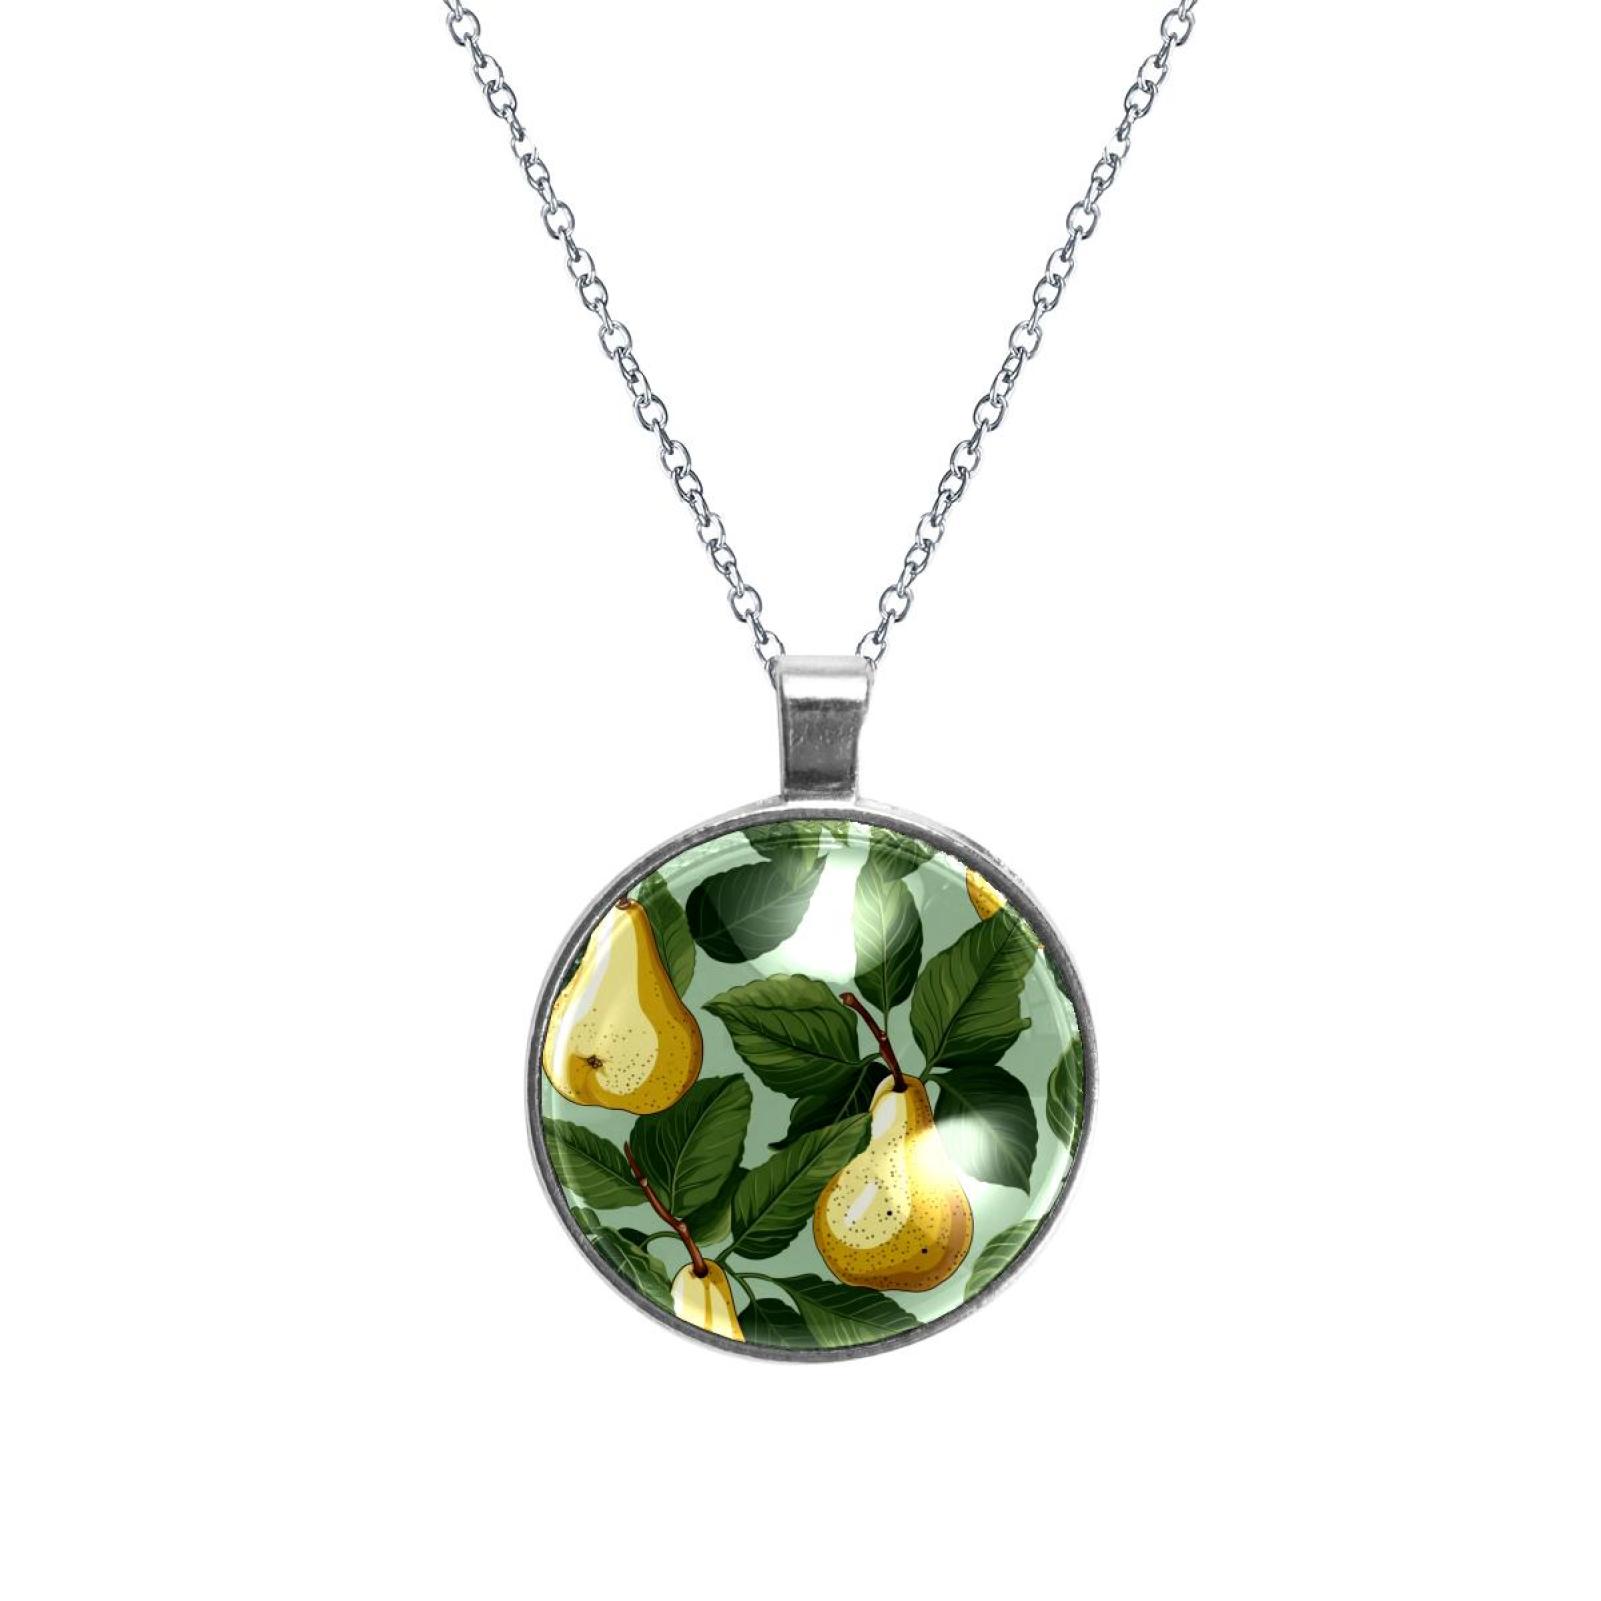 Pear Glass Circular Pendant Necklace - Stunning Jewelry for Women ...